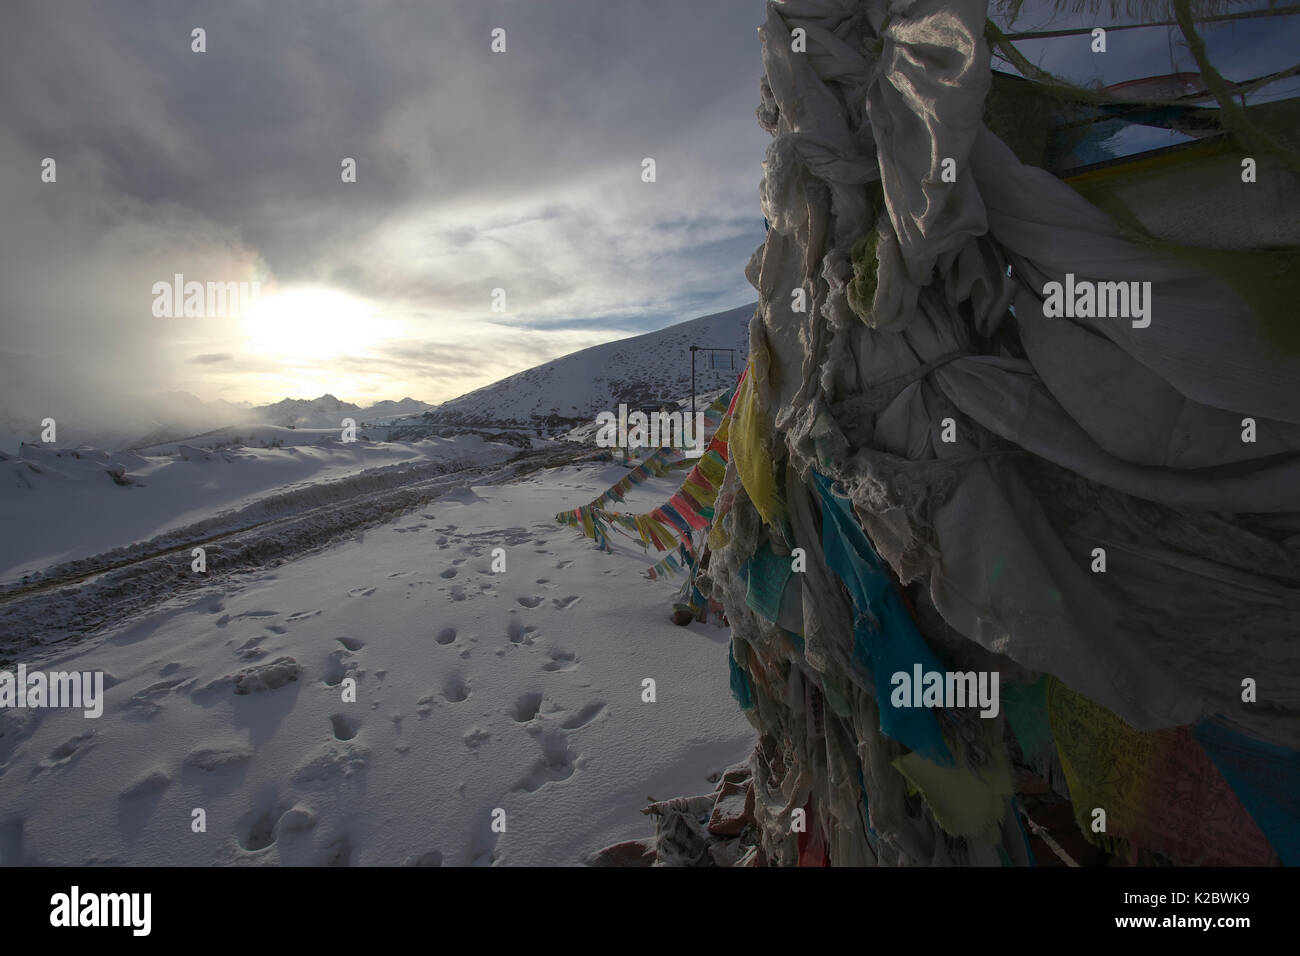 Tattered prayer flags in snow covered landscape with grey clouds, Baima Snow Mountain Nature Reserve, Yunnan Province, China. April 2010. Stock Photo